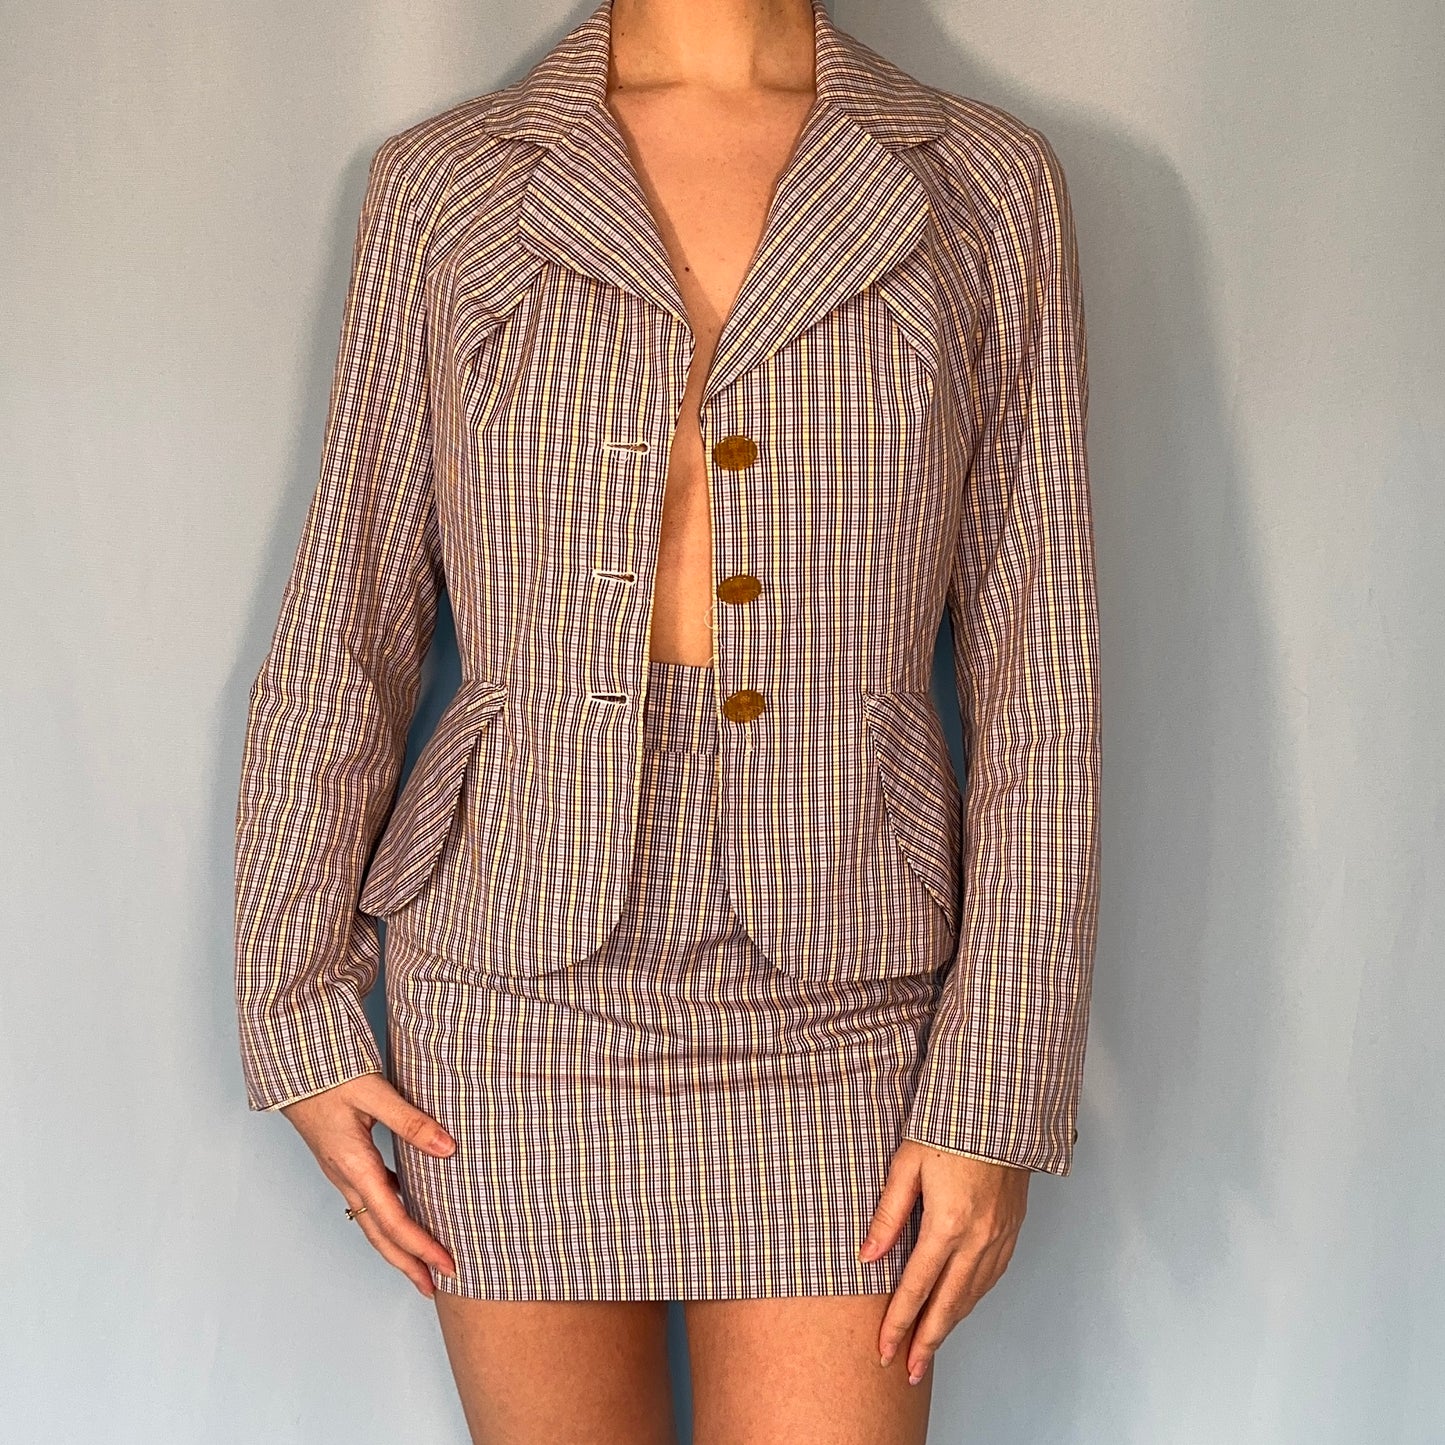 Vivienne Westwood Spring 1994 “Cafe Society” Checked Skirt & Jacket Suit Set